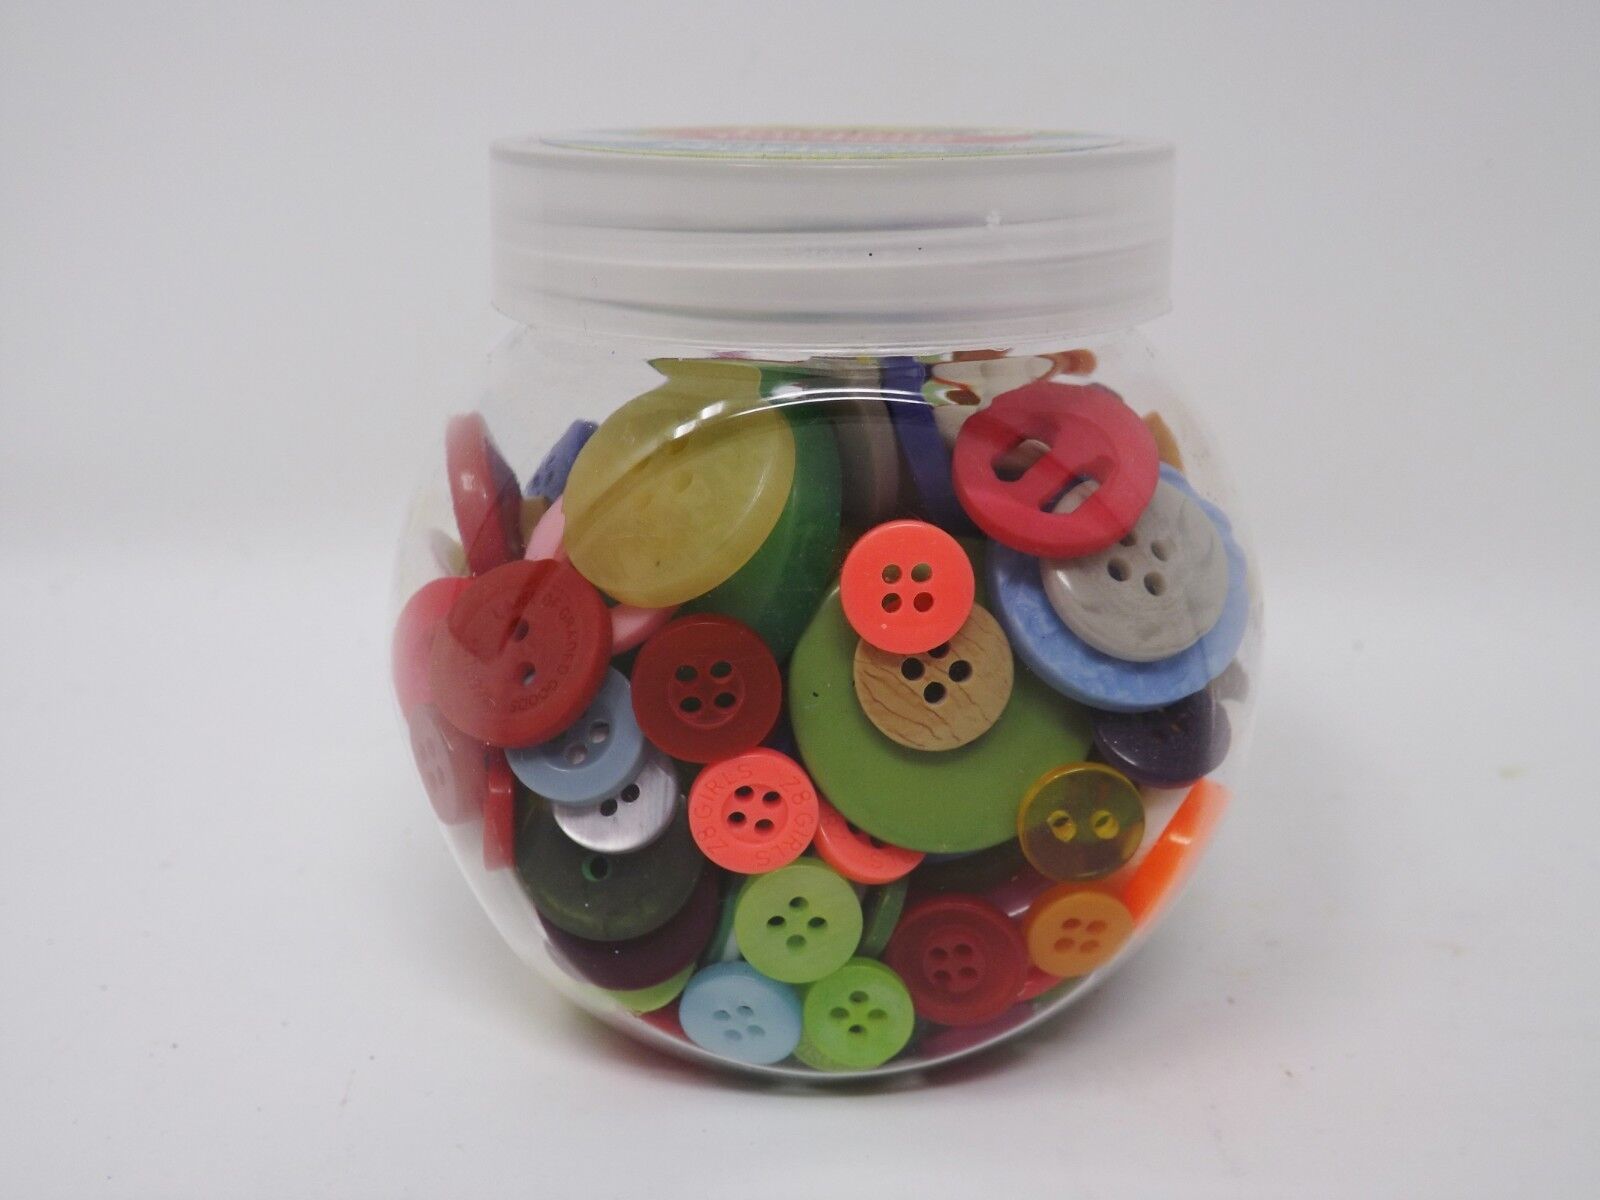 Lot of Assorted Buttons, Red Buttons, Vintage Buttons, 8 Ounces of Buttons,  Large Buttons, Celluloid Buttons, Buttons on Cards, Pink Buttons 